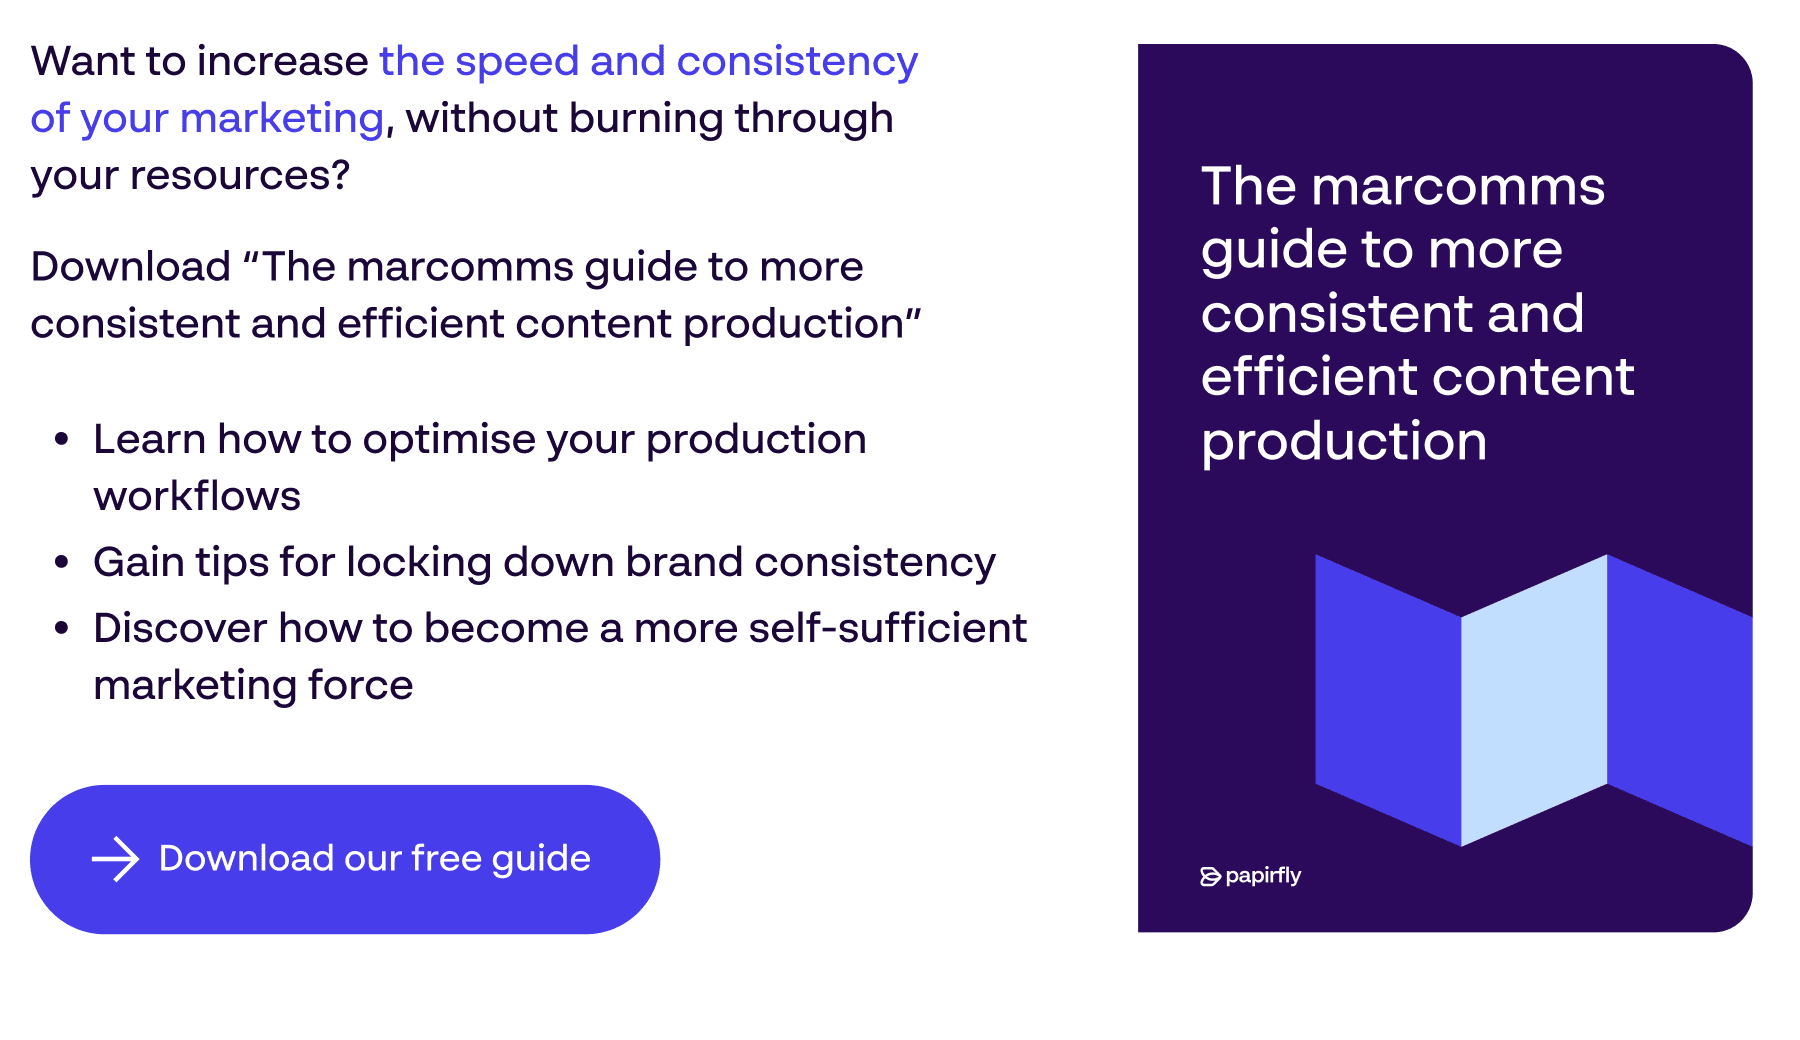 “Papirfly download for a guide to more consistent and efficient content production for businesses”